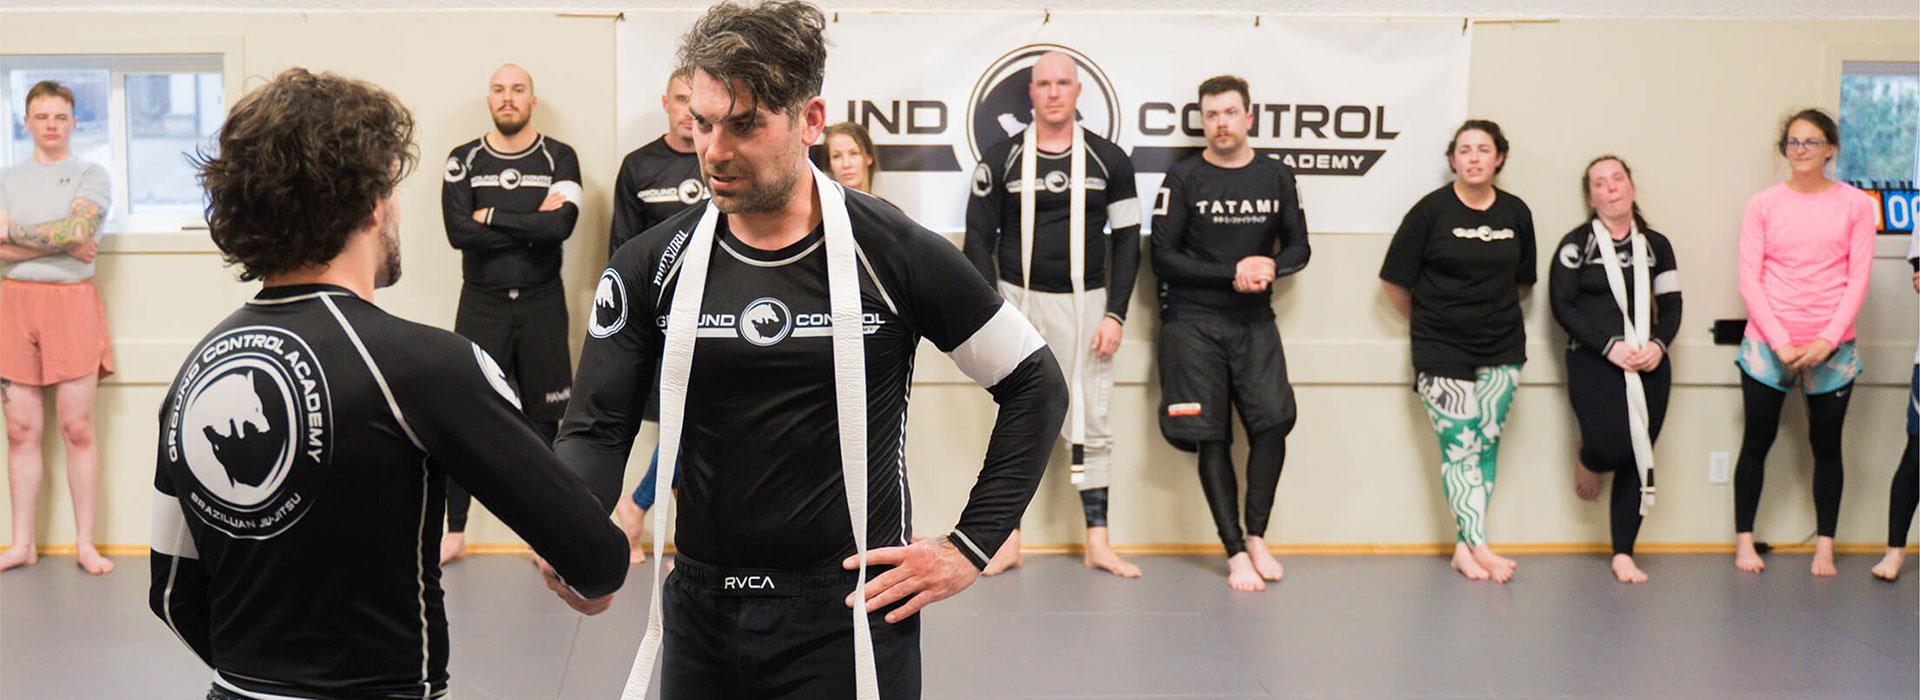 Adult/Coed BJJ Class 18+ In Ardrossan, Canada